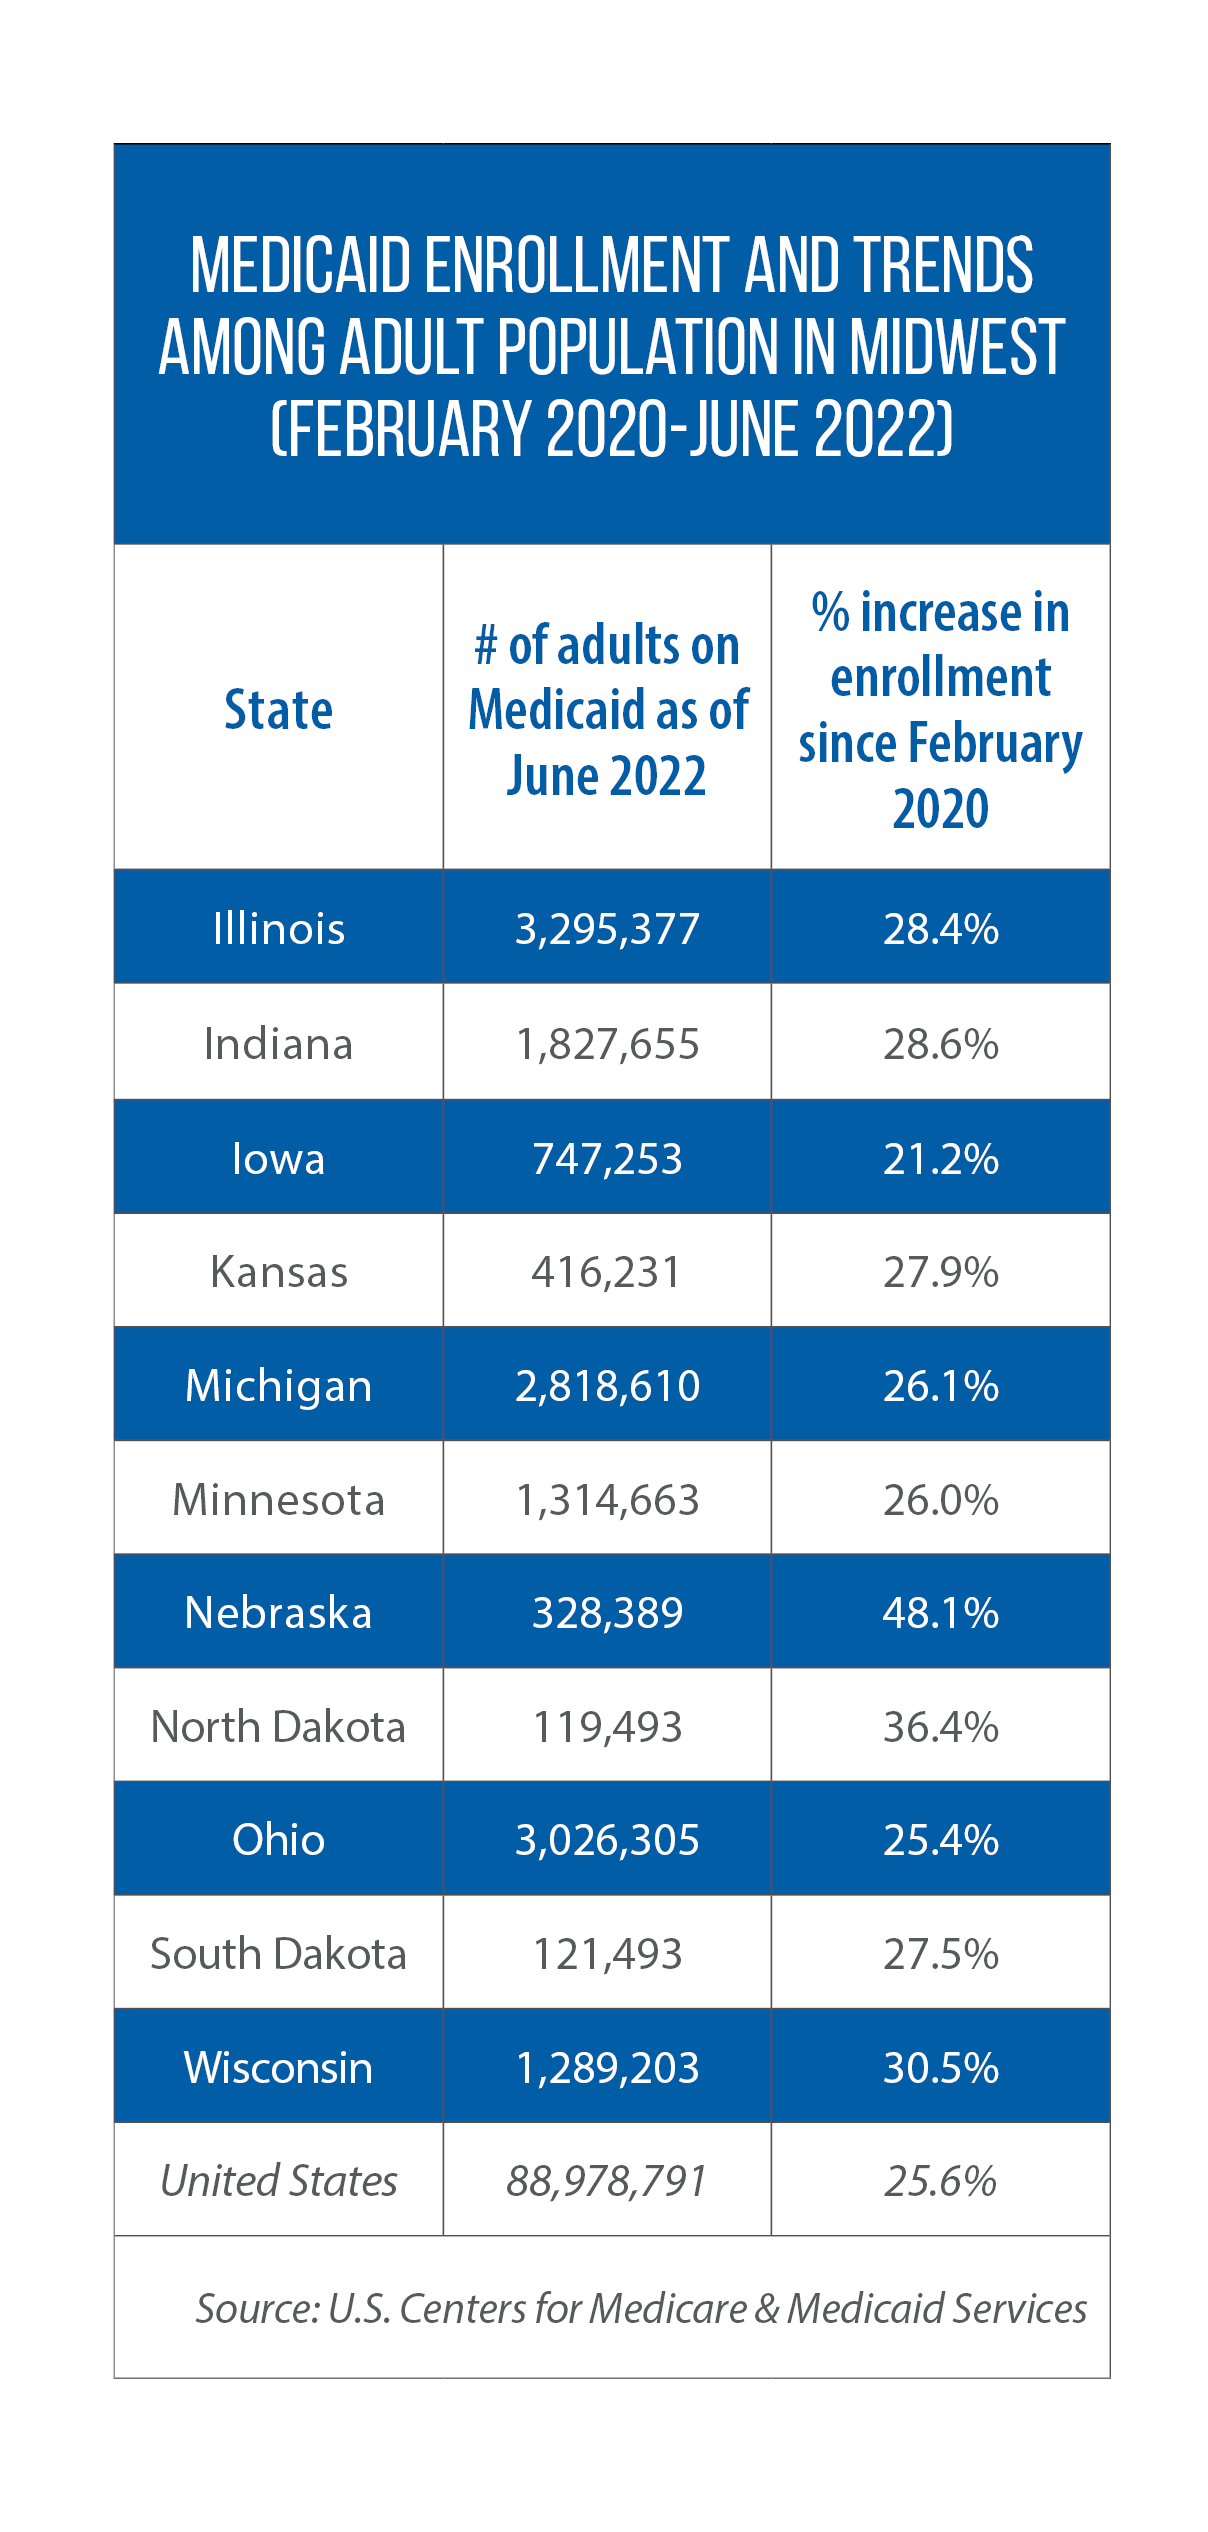 Medicaid adult enrollment & trends in Midwestern states from February 2020 to June 2022